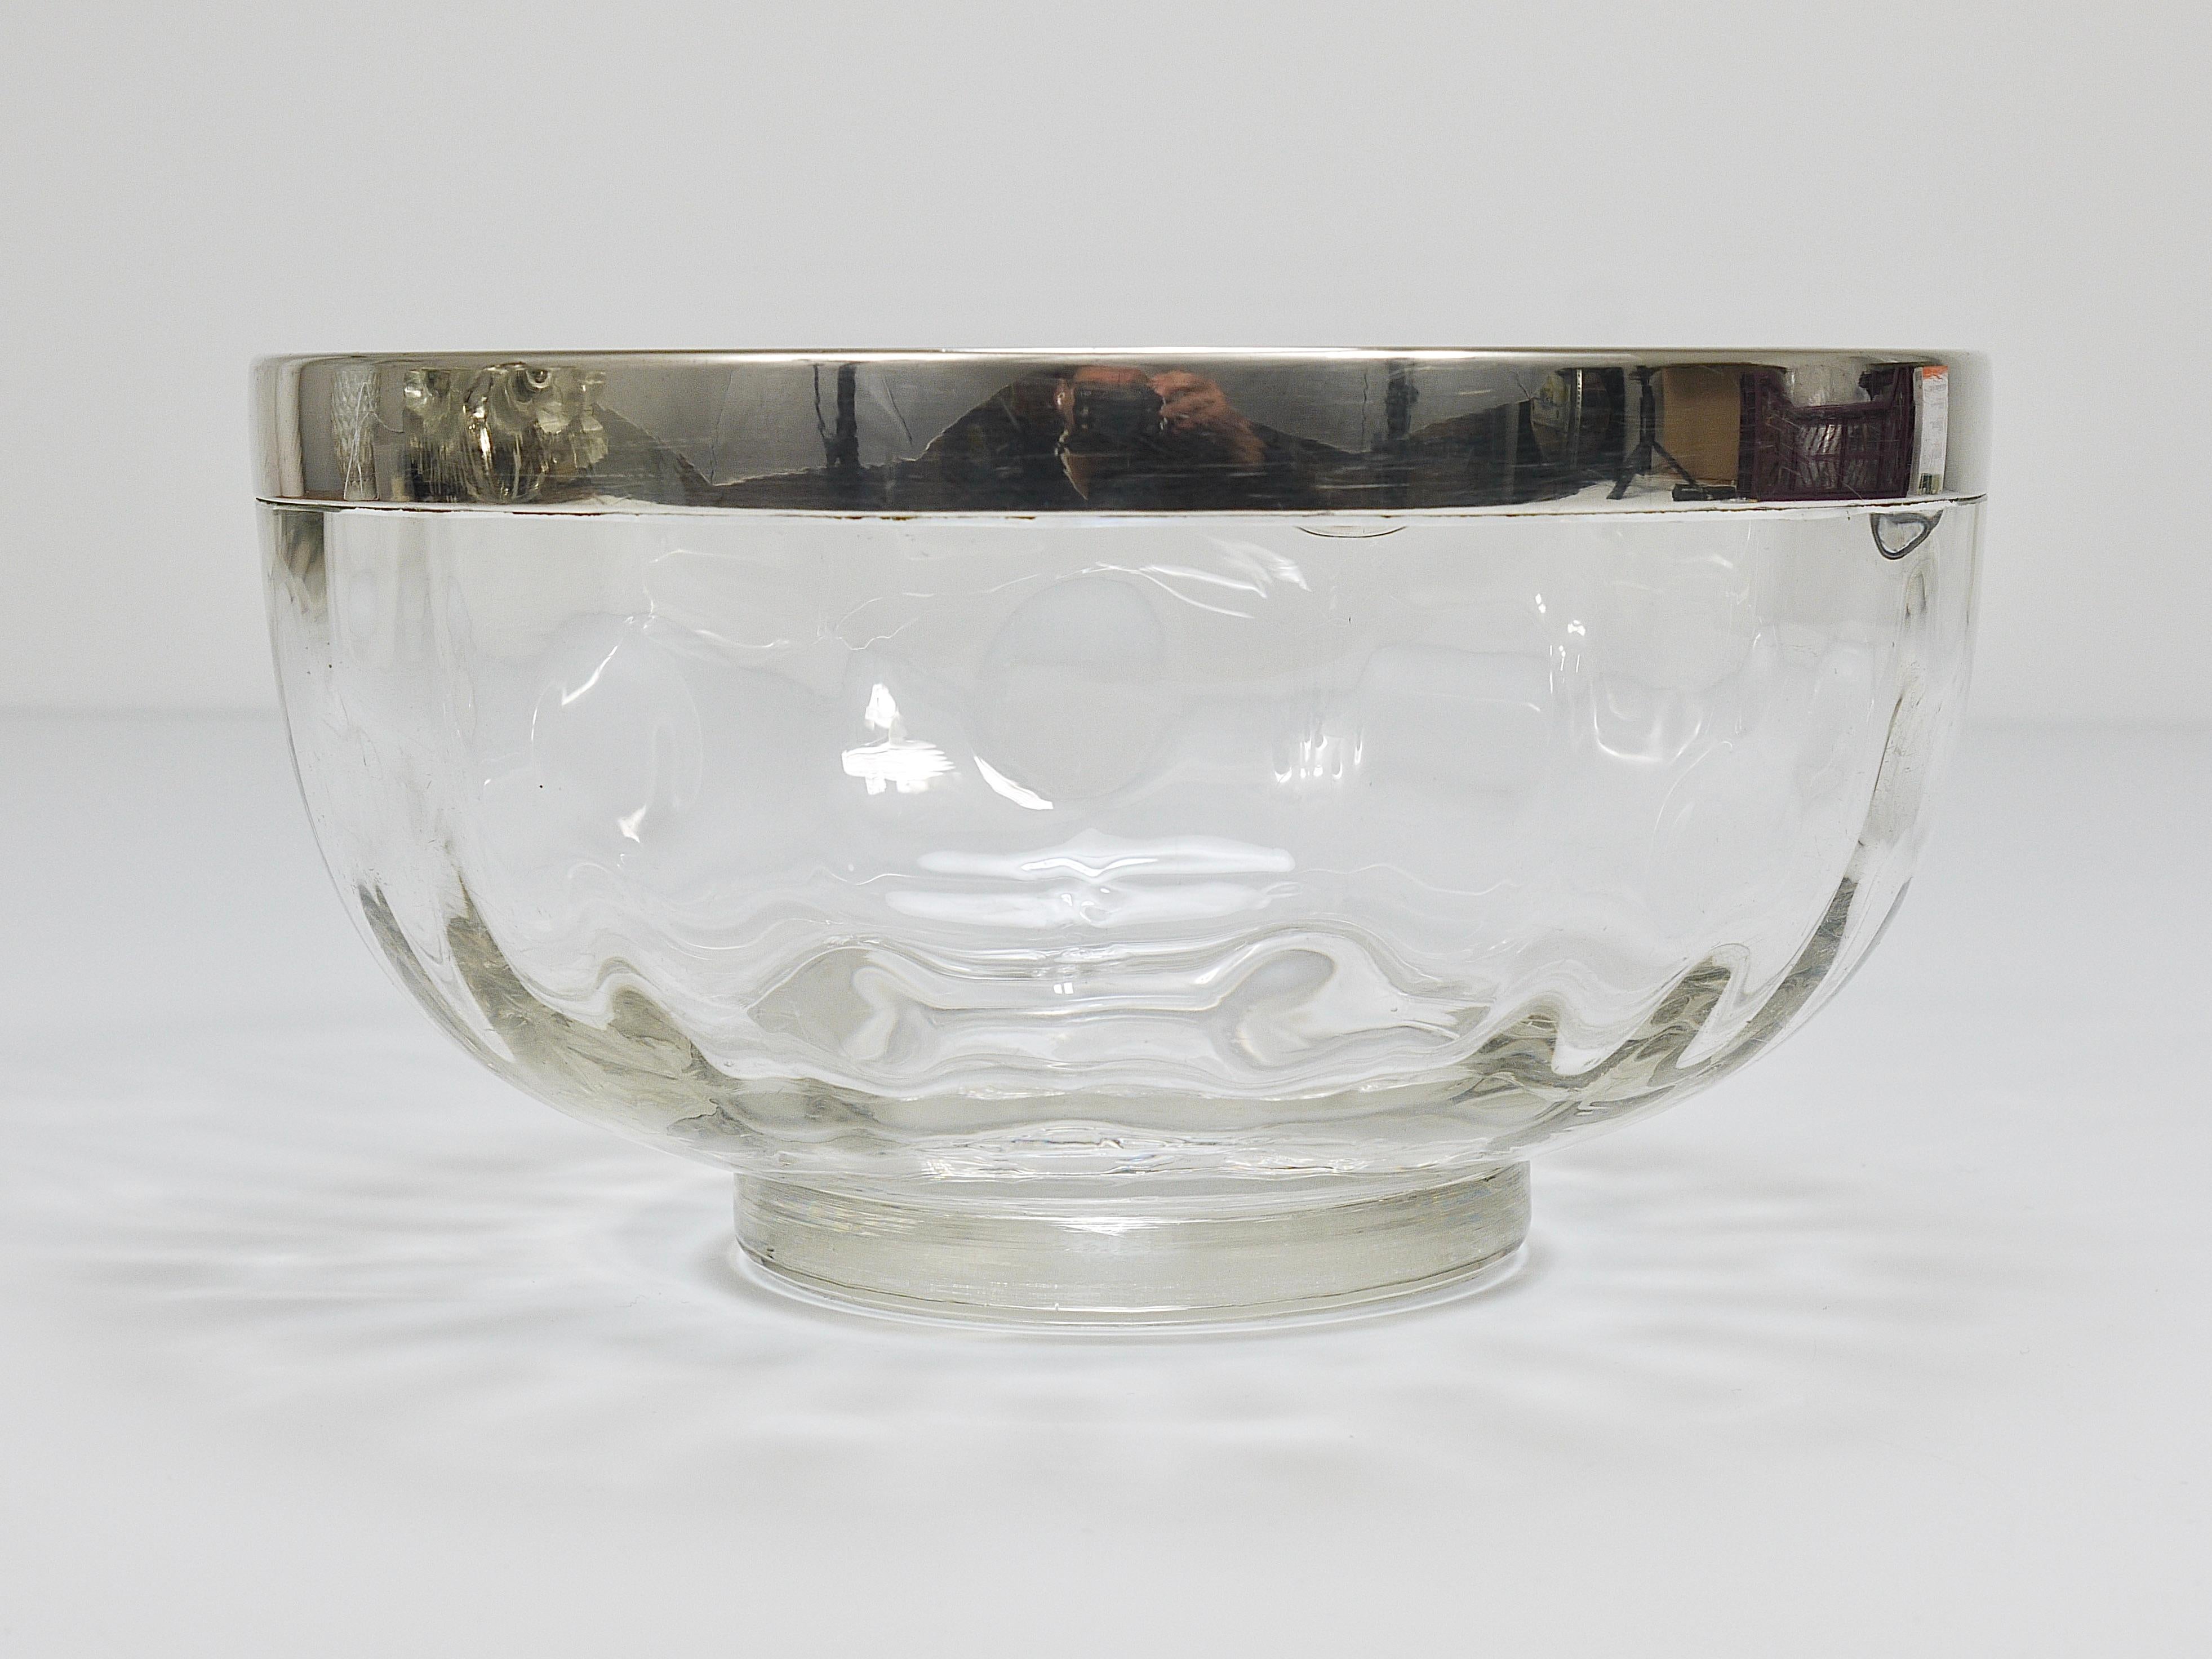 A beautiful Art Nouveau Vienna Secession mouth-blown „Meteor“ optical glass bowl with a rim made of silver-plated brass from the early 1900s. Designed by Koloman Moser (1868 - 1919), manufactured by Adolf Meyr's Neffe for E. Bakalowits Söhne in